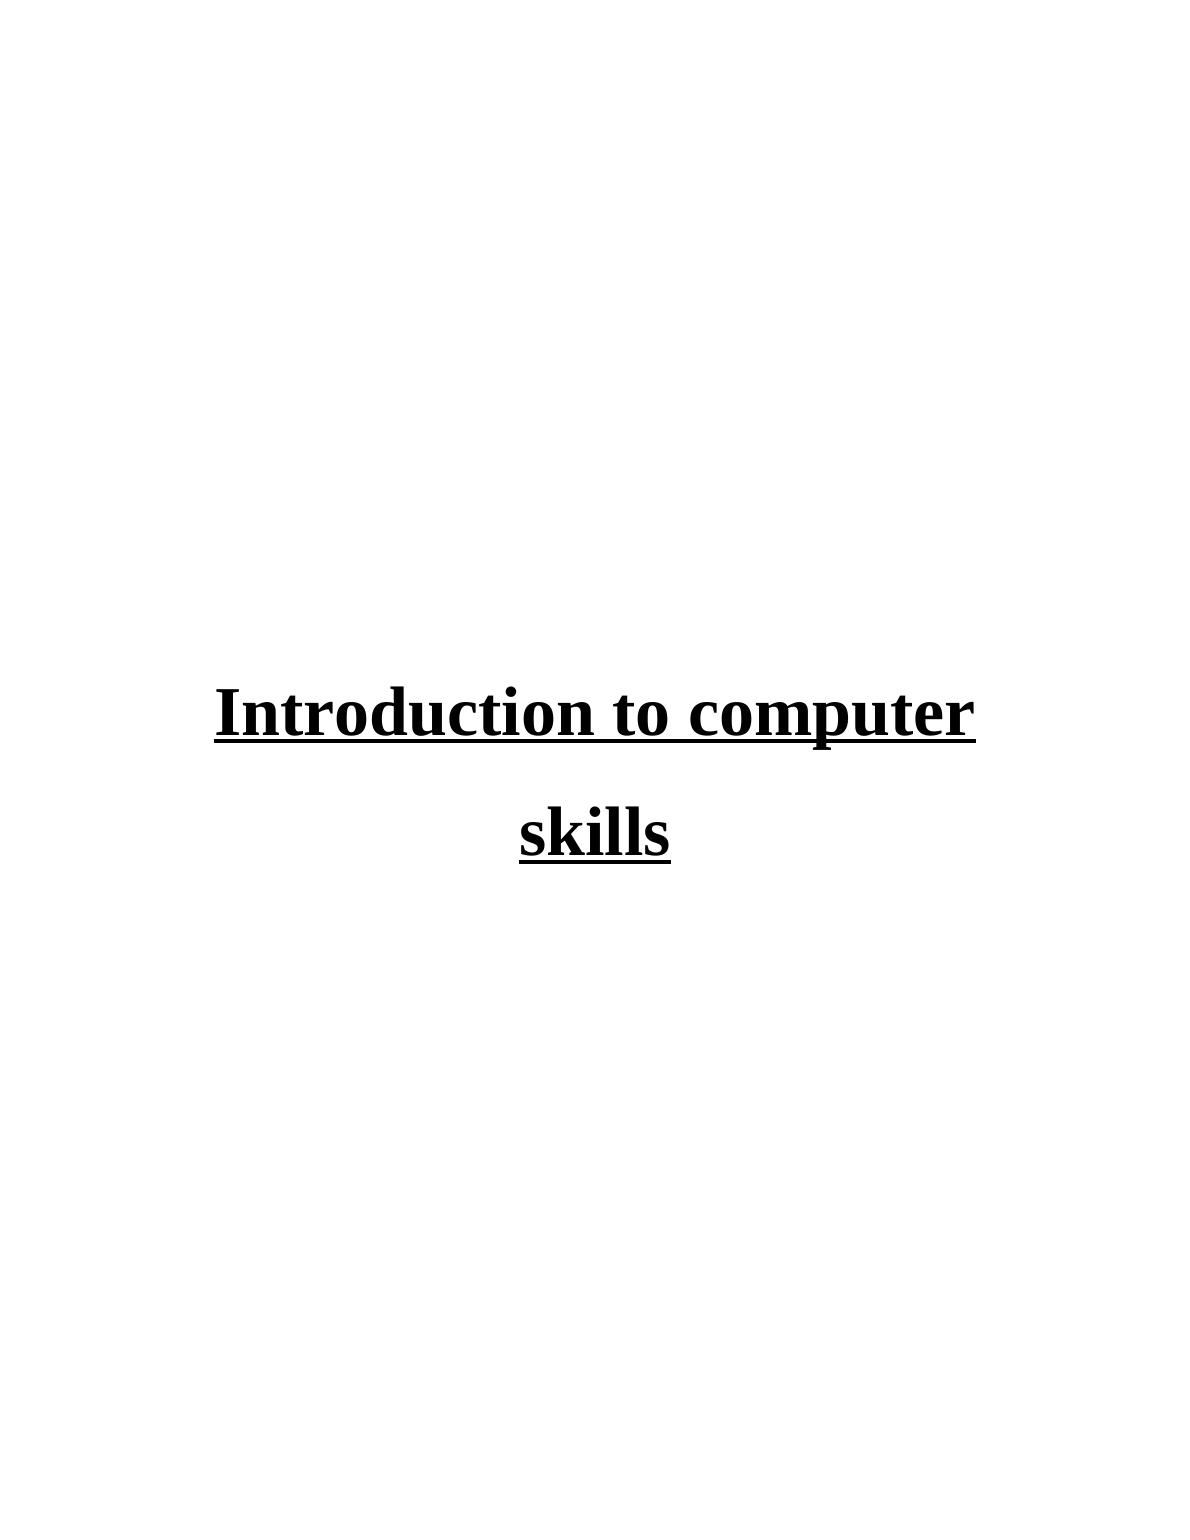 Introduction to Computer Skills Assignment Solved_1